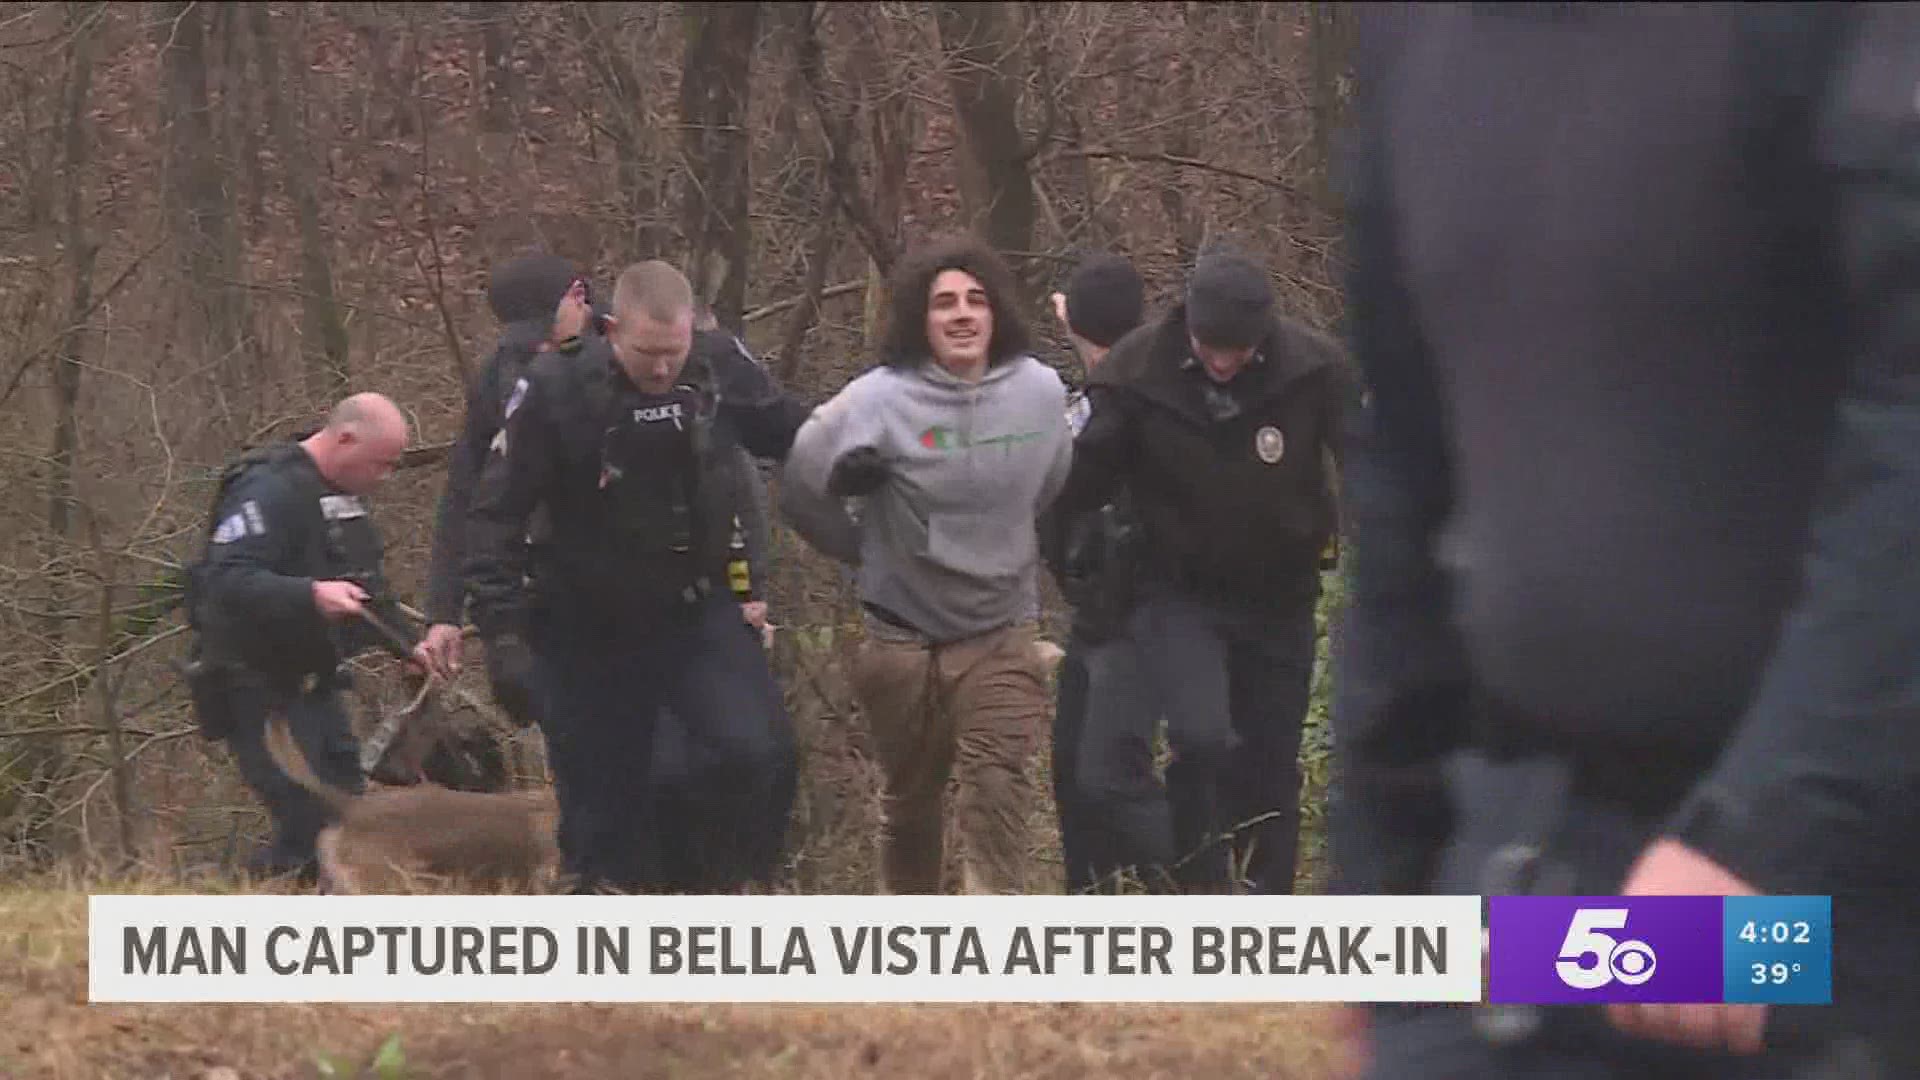 Bella Vista Police caught Tyler Curry in the act of attempting to break into his girlfriend's house again and arrested him. https://bit.ly/33Ij79p